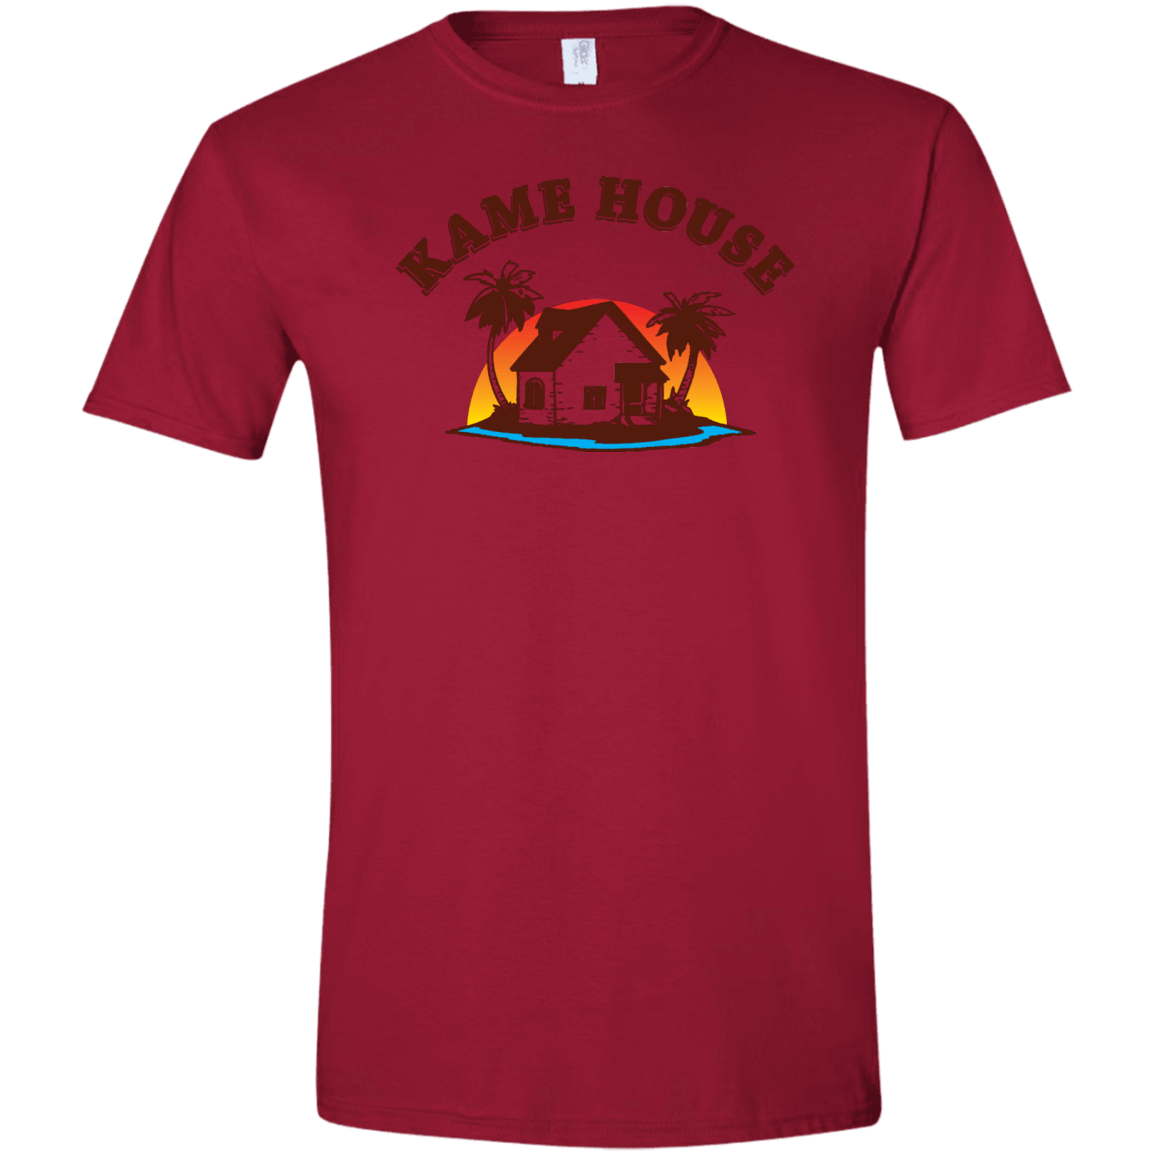 T-Shirts Cardinal Red / S Kame House Men's Semi-Fitted Softstyle